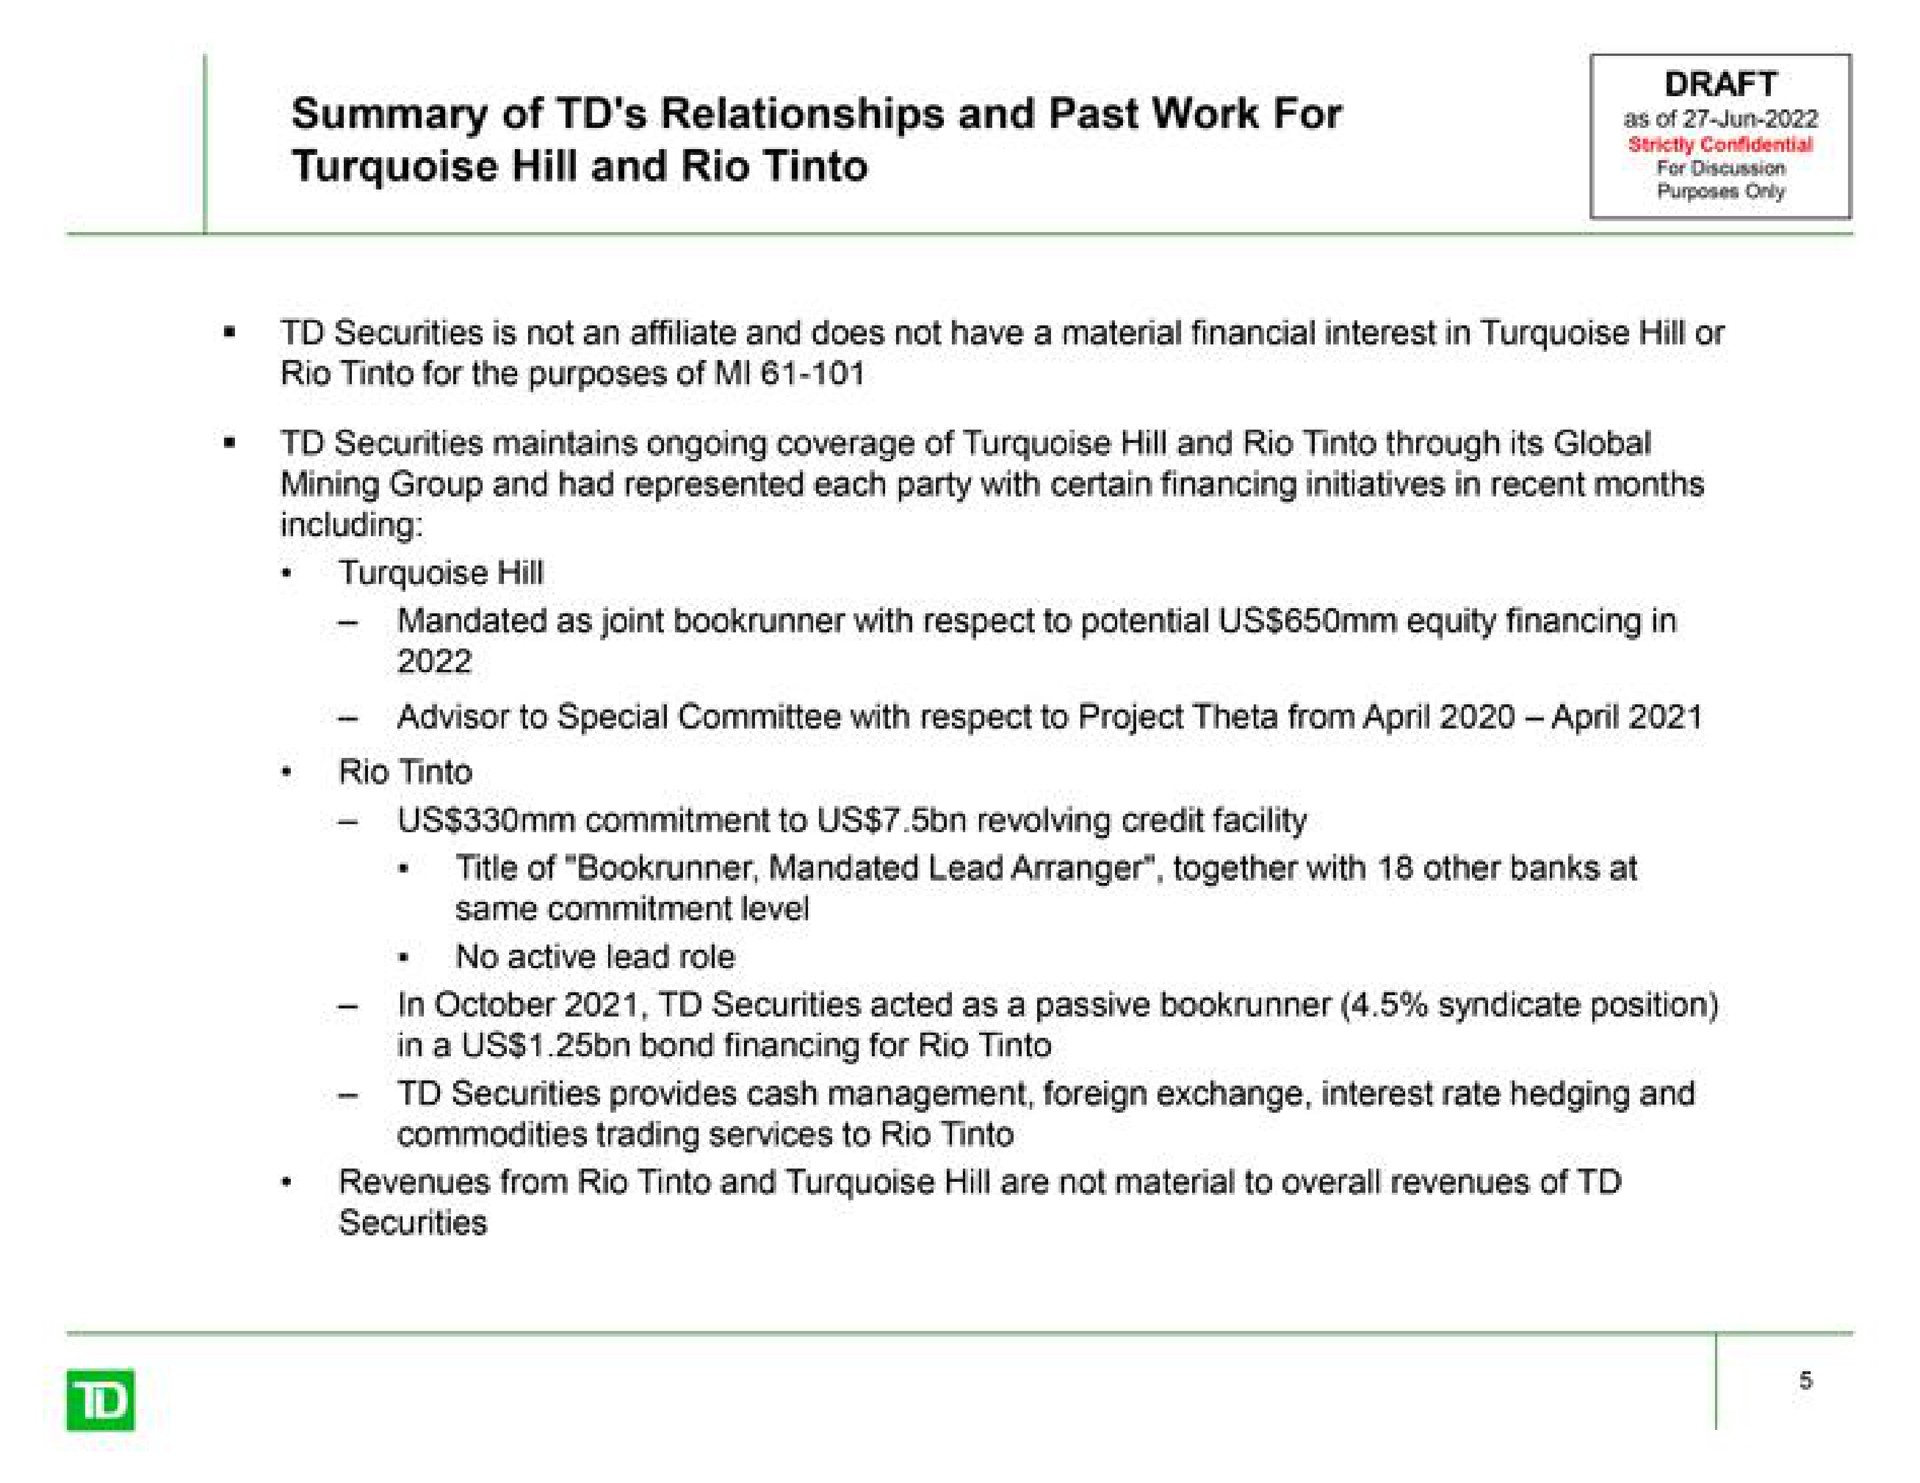 summary of relationships and past work for turquoise hill and rio as of rio for the purposes of securities maintains ongoing coverage of turquoise hill and rio through its global mandated as joint with respect to potential us equity financing in advisor to special committee with respect to project theta from rio us commitment to us revolving credit facility same commitment level in securities acted as a passive syndicate position in a us bond financing for rio securities provides cash management foreign exchange interest rate hedging and commodities trading services to rio | TD Securities